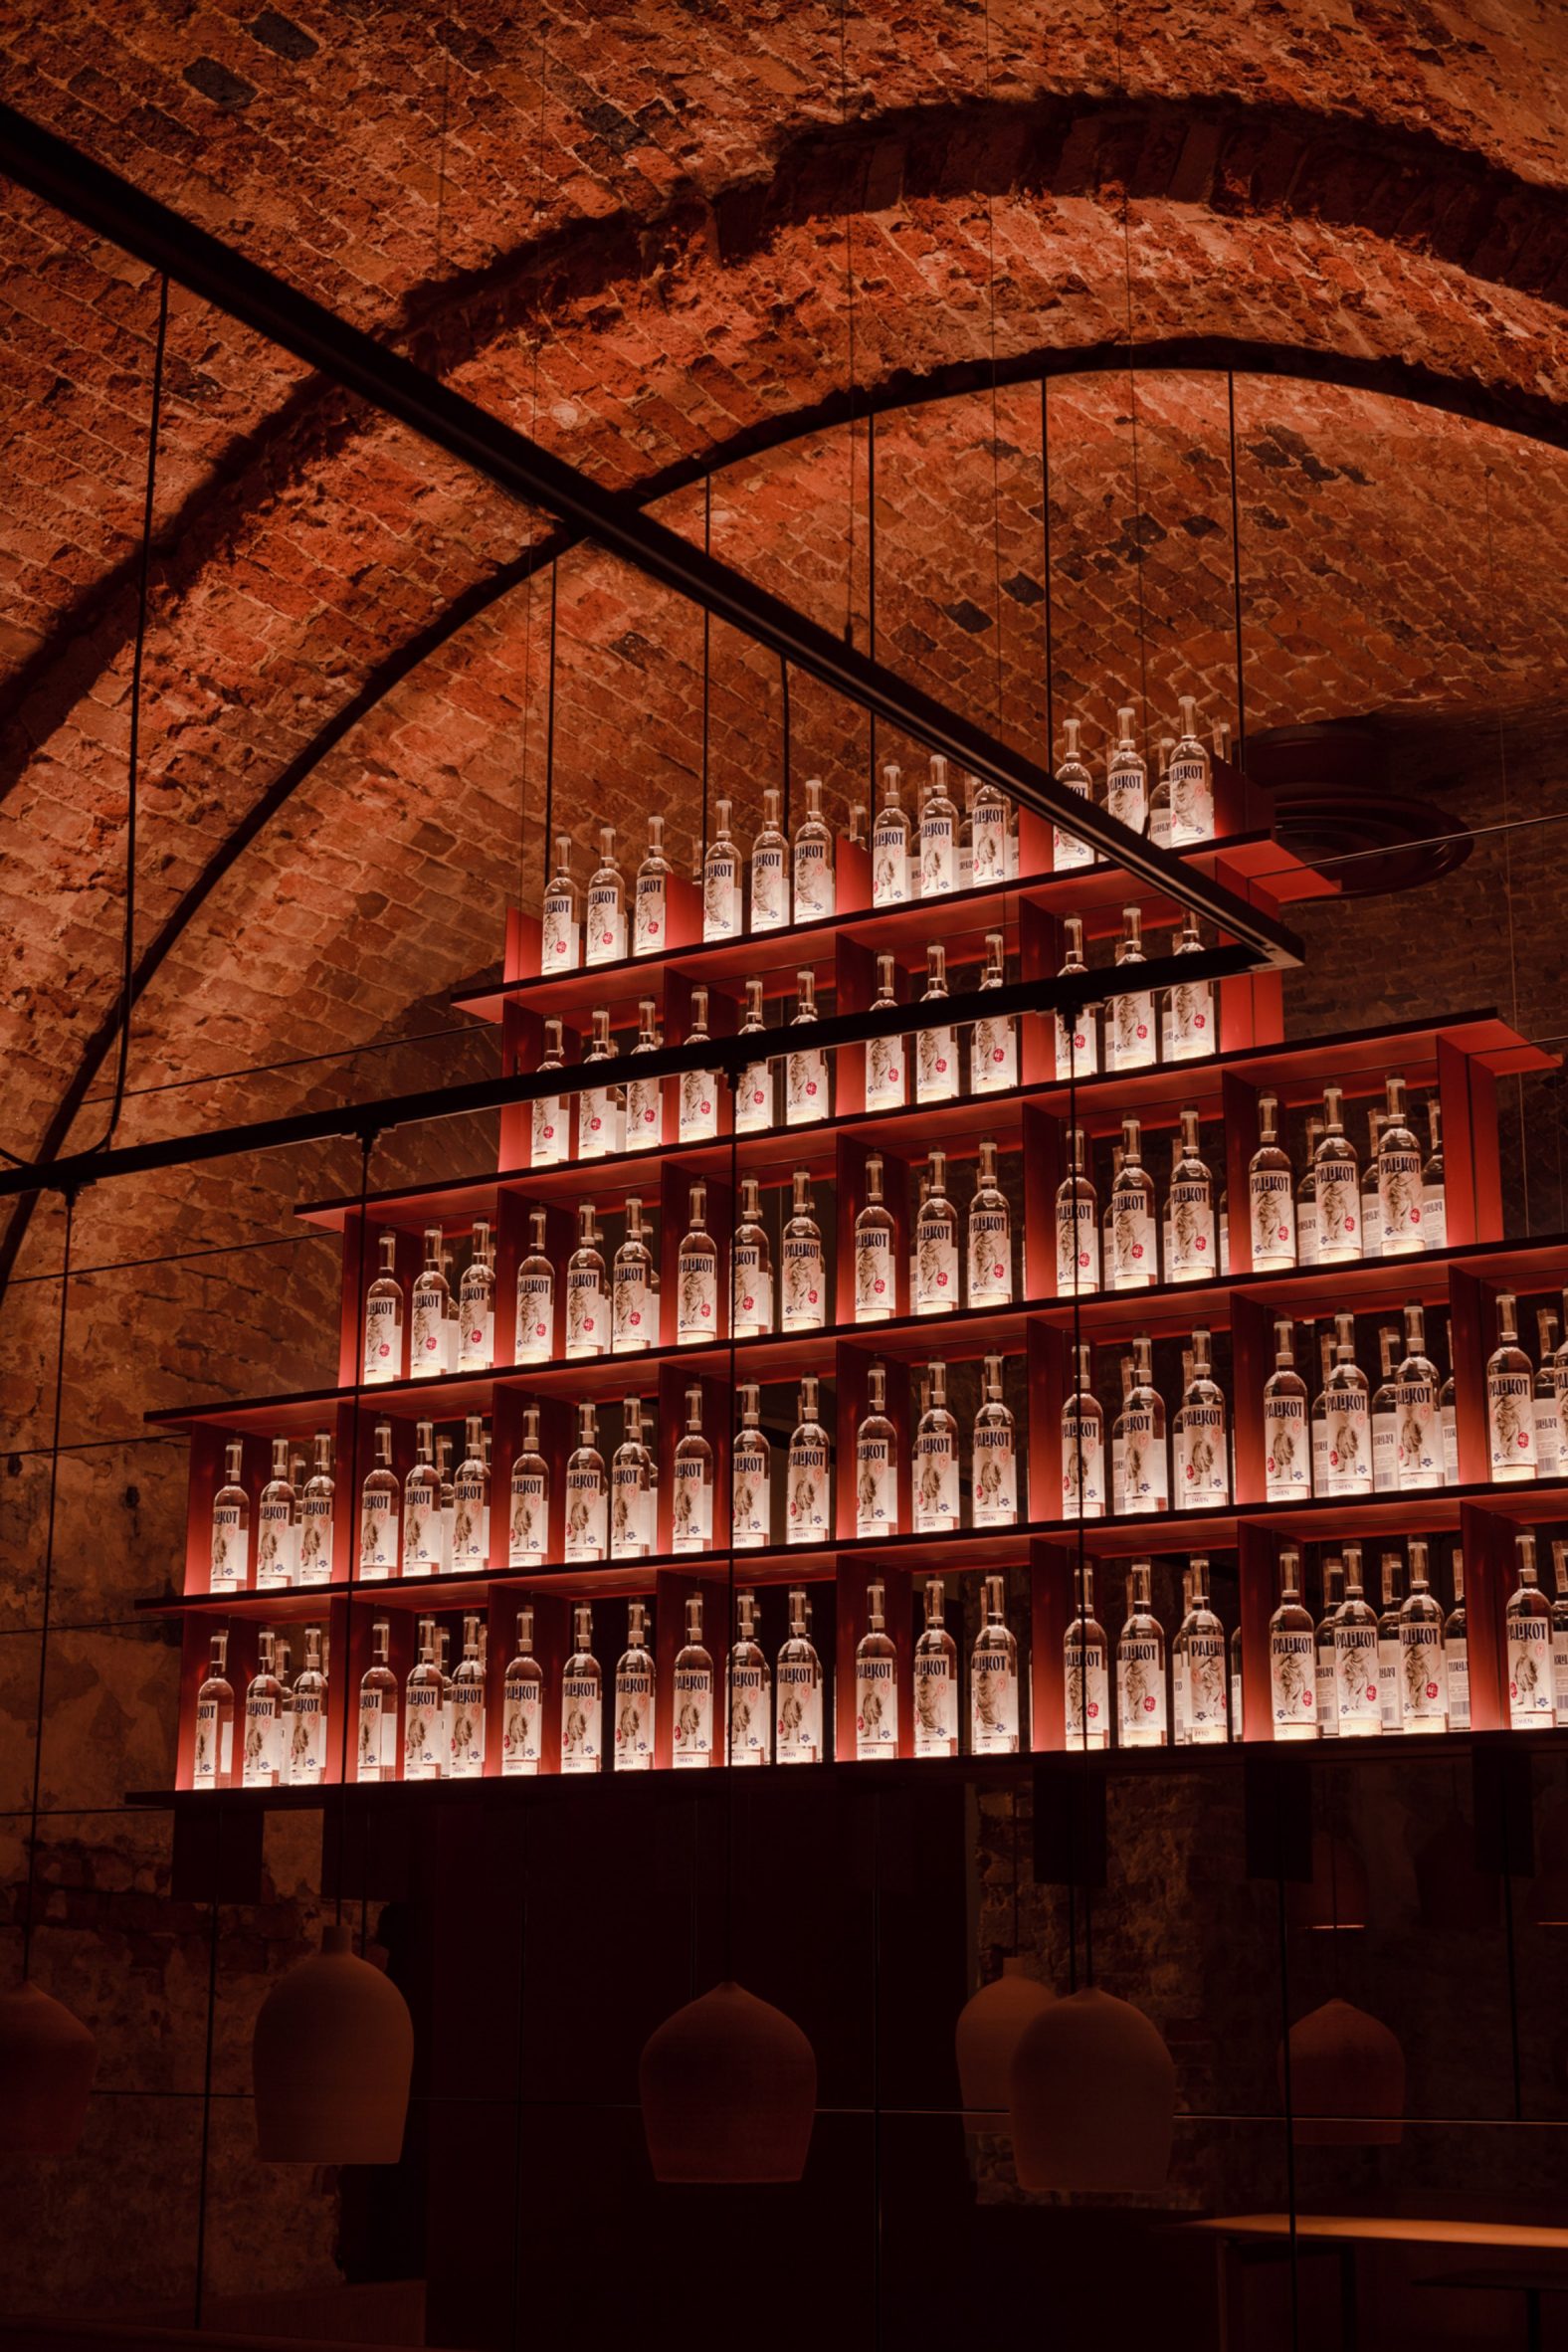 Red bottle display shelving inside a vaulted brick space